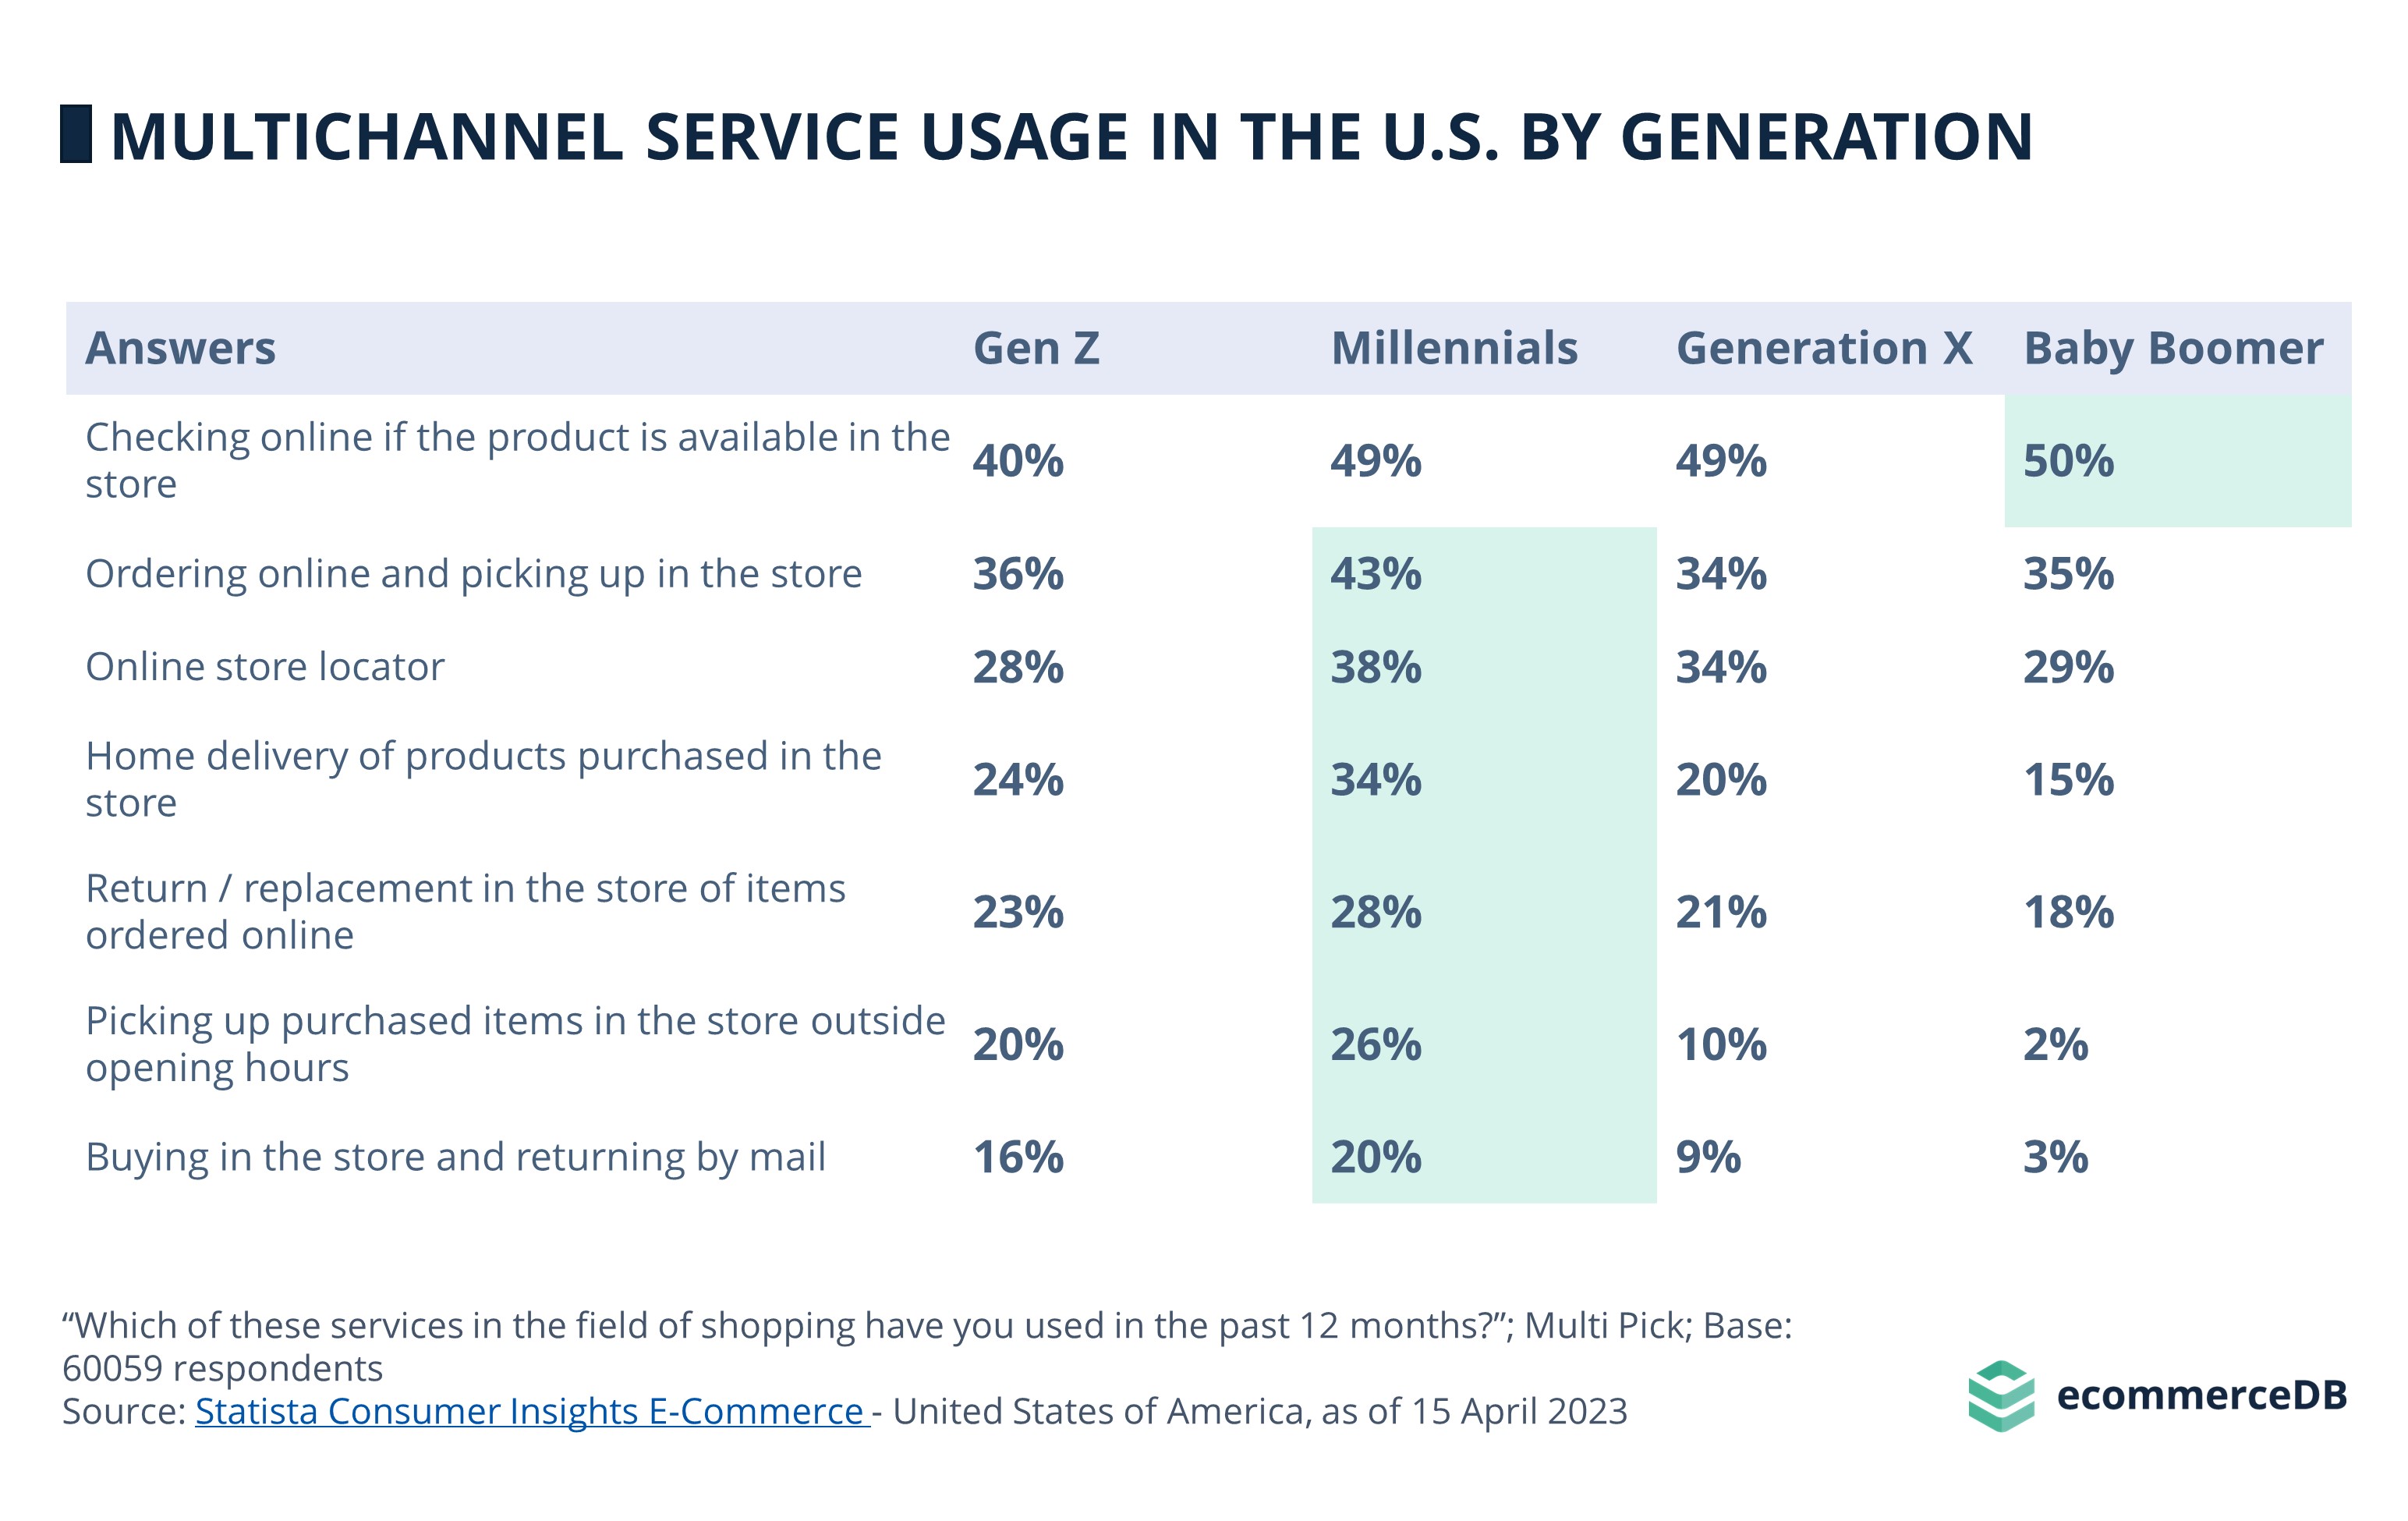 Multichannel service usage in the US by generation